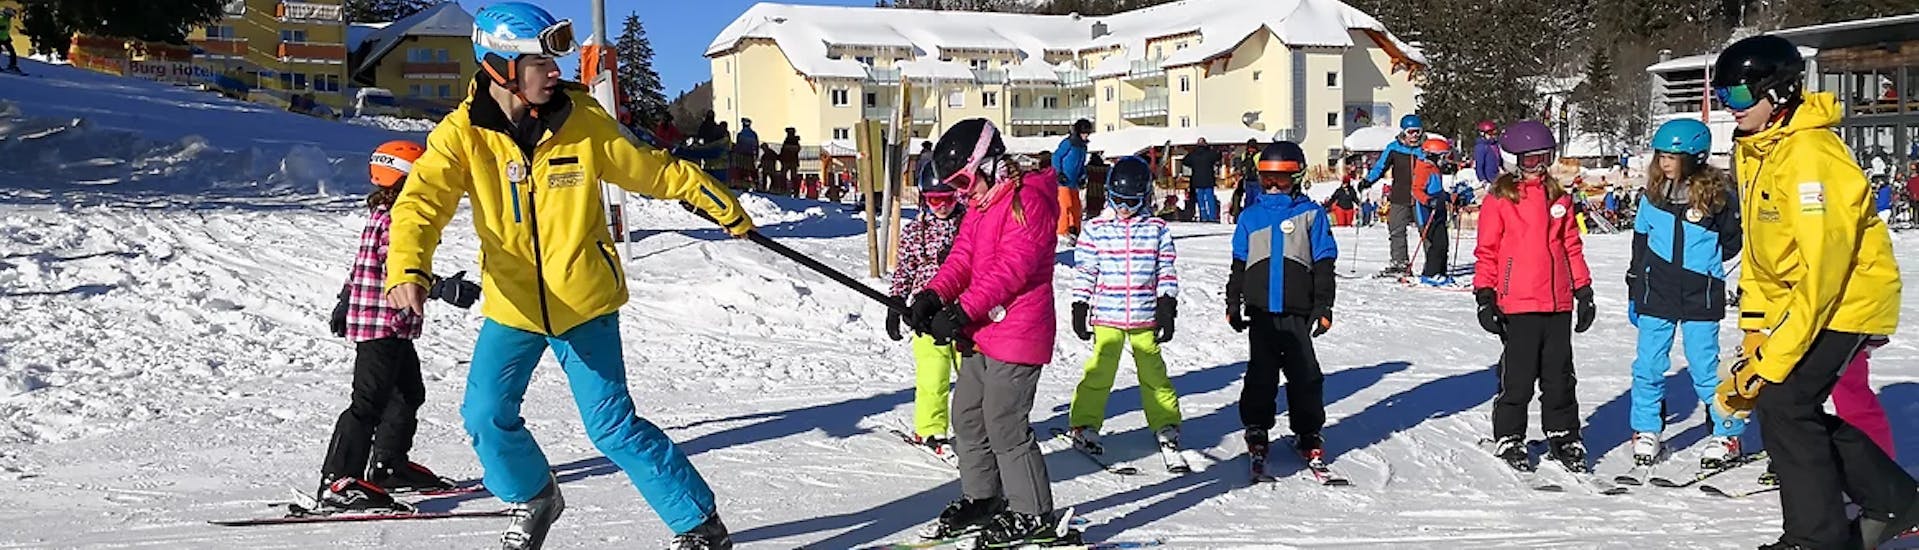 A ski instructor pulls a child with the poles and shows her the right form during the kids ski lessons (4-13 yrs) for all levels with Schneesportschule ON SNOW Feldberg.